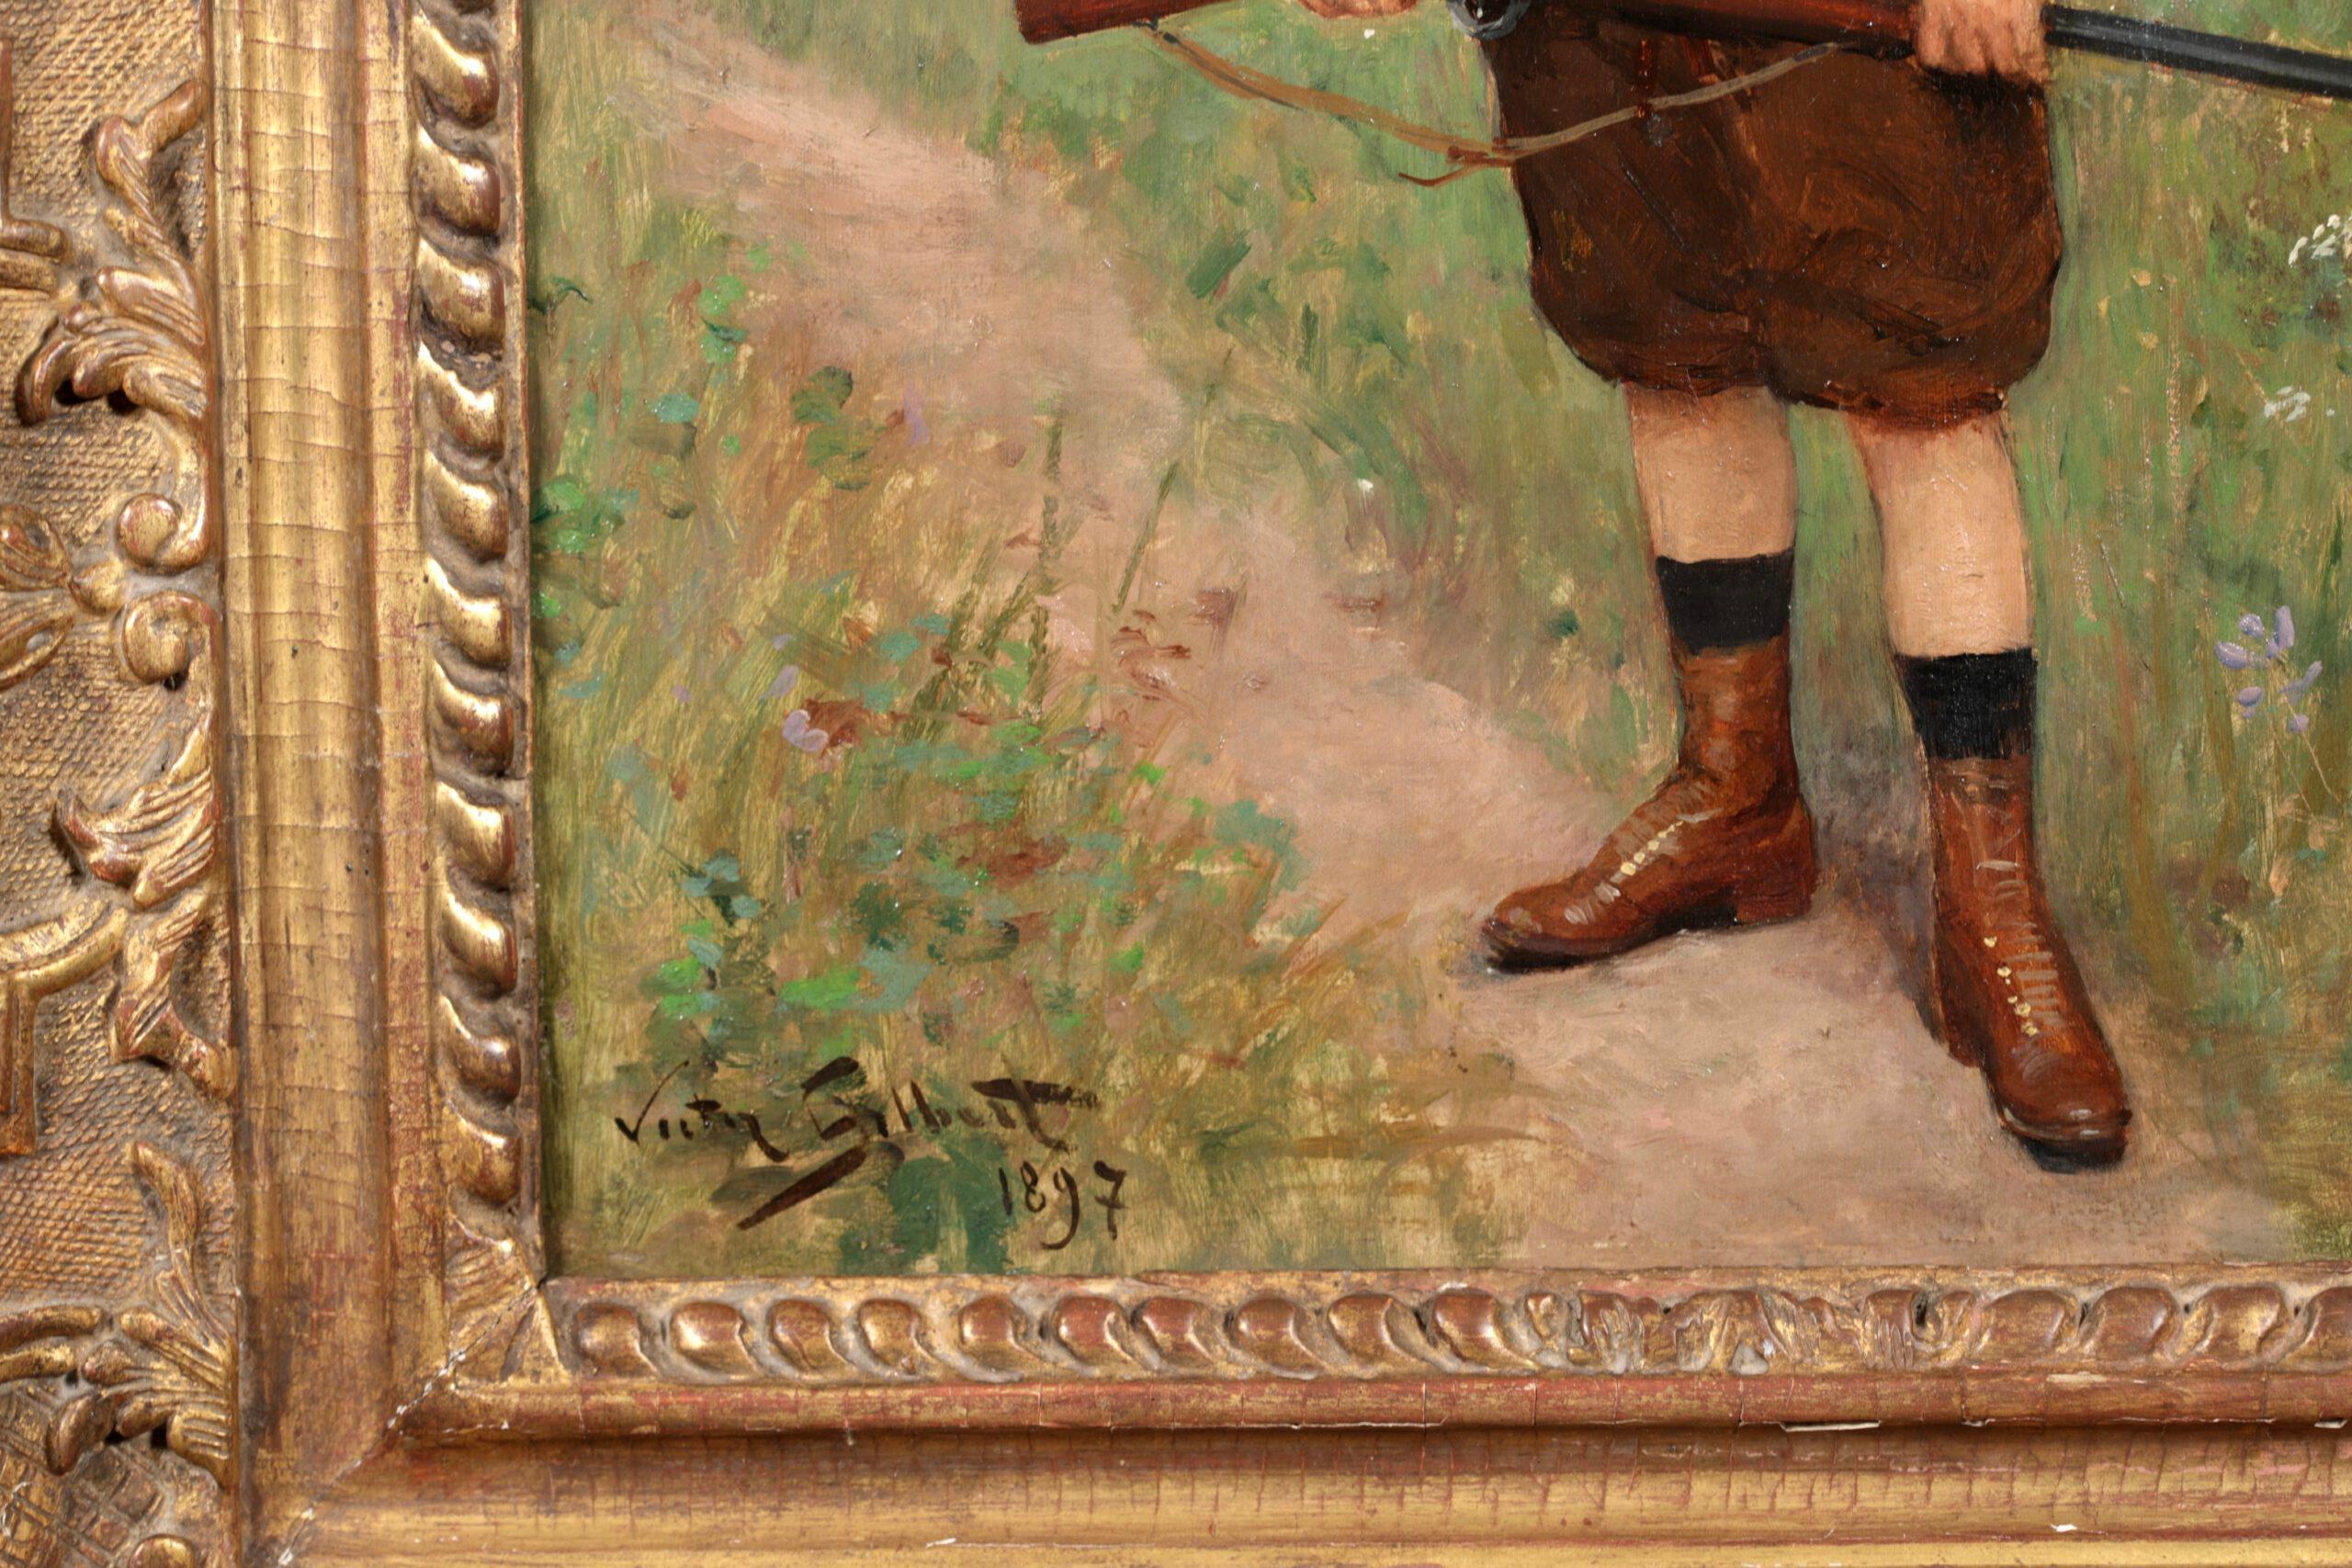 Signed oil on panel portrait by French realist painter Victor Gabriel Gilbert. The work depicts a young hunter wearing a brown outfit with laced up leather boots standing on a path in a landscape holding a shotgun.

Signature:
Signed and dated 1897